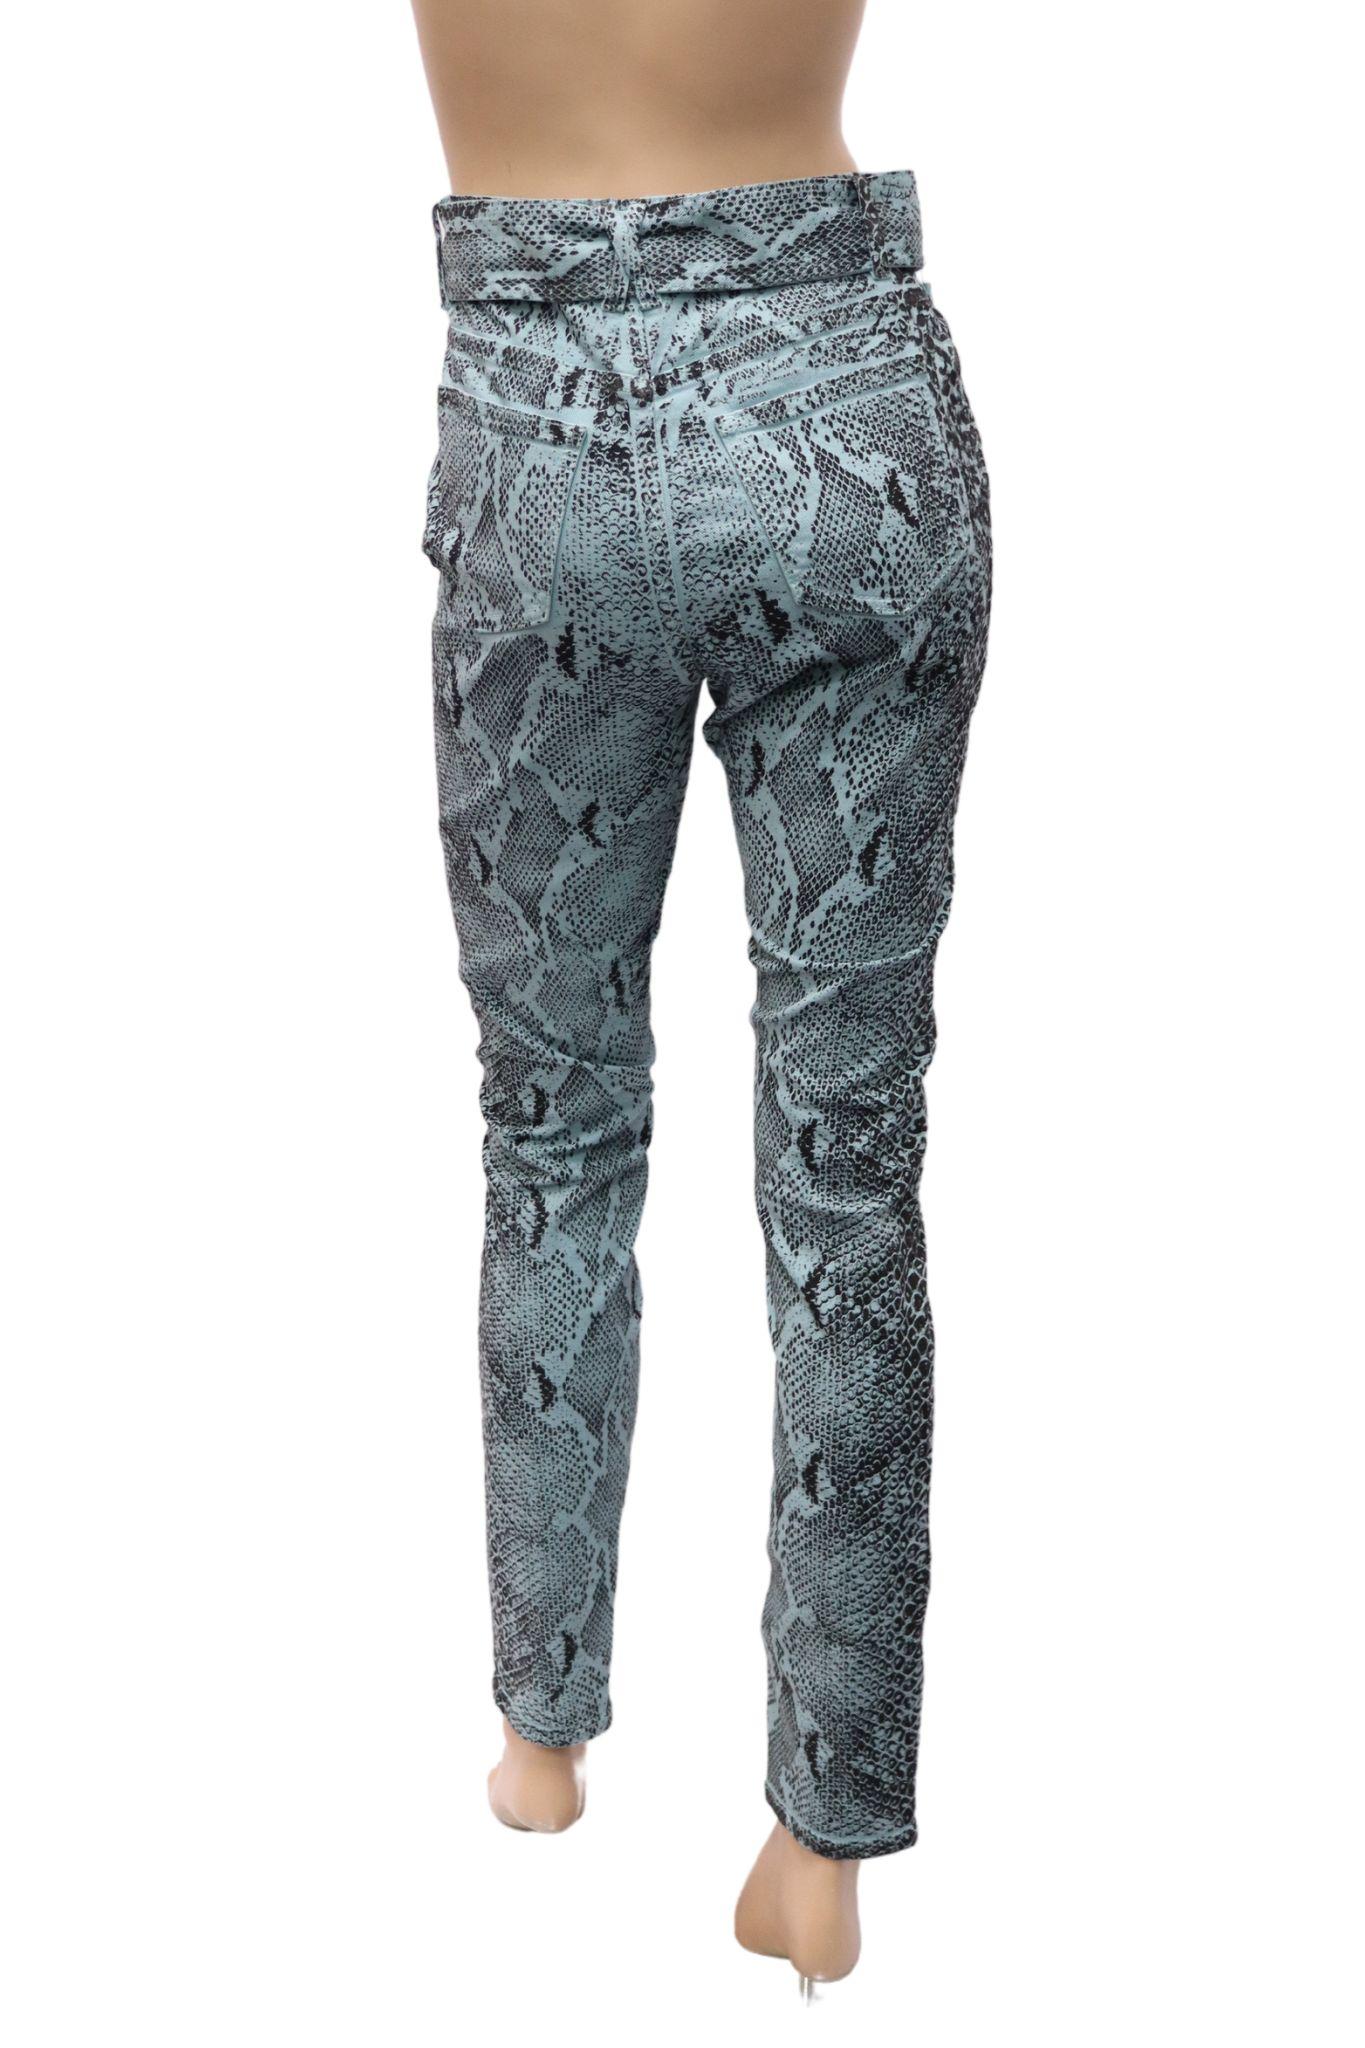 Just Cavalli NWT Snake Print Jeans - EU 26 For Sale 2